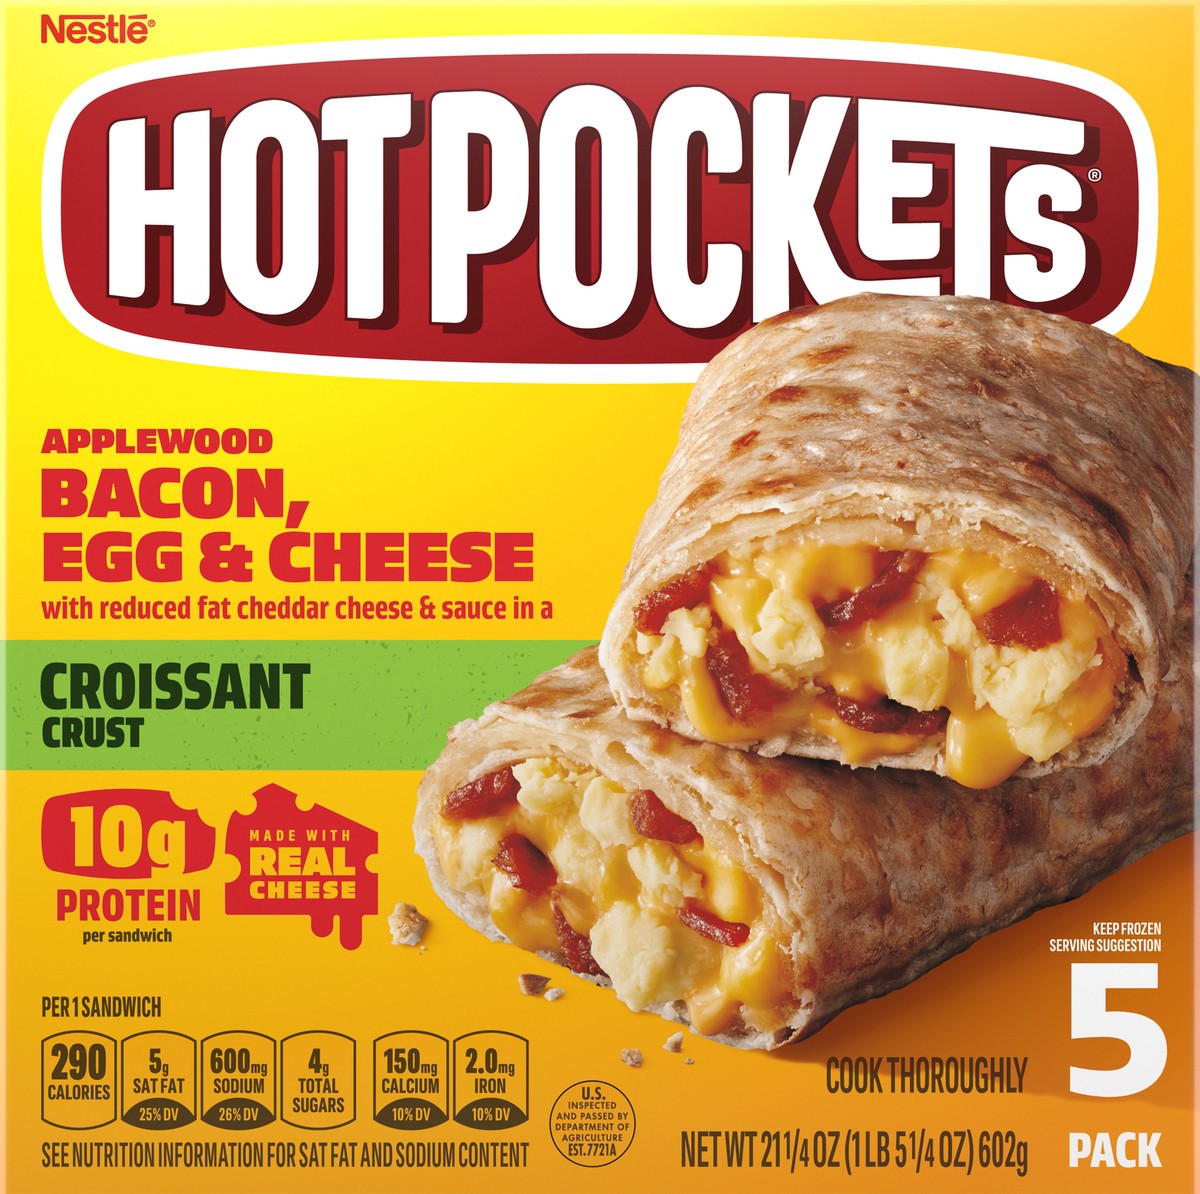 slide 6 of 9, Hot Pockets Applewood Bacon, Egg & Cheese Croissant Crust Frozen Breakfast Sandwiches, Breakfast Hot Pockets Made with Real Reduced Fat Cheddar Cheese, 5 Count, 21.25 oz